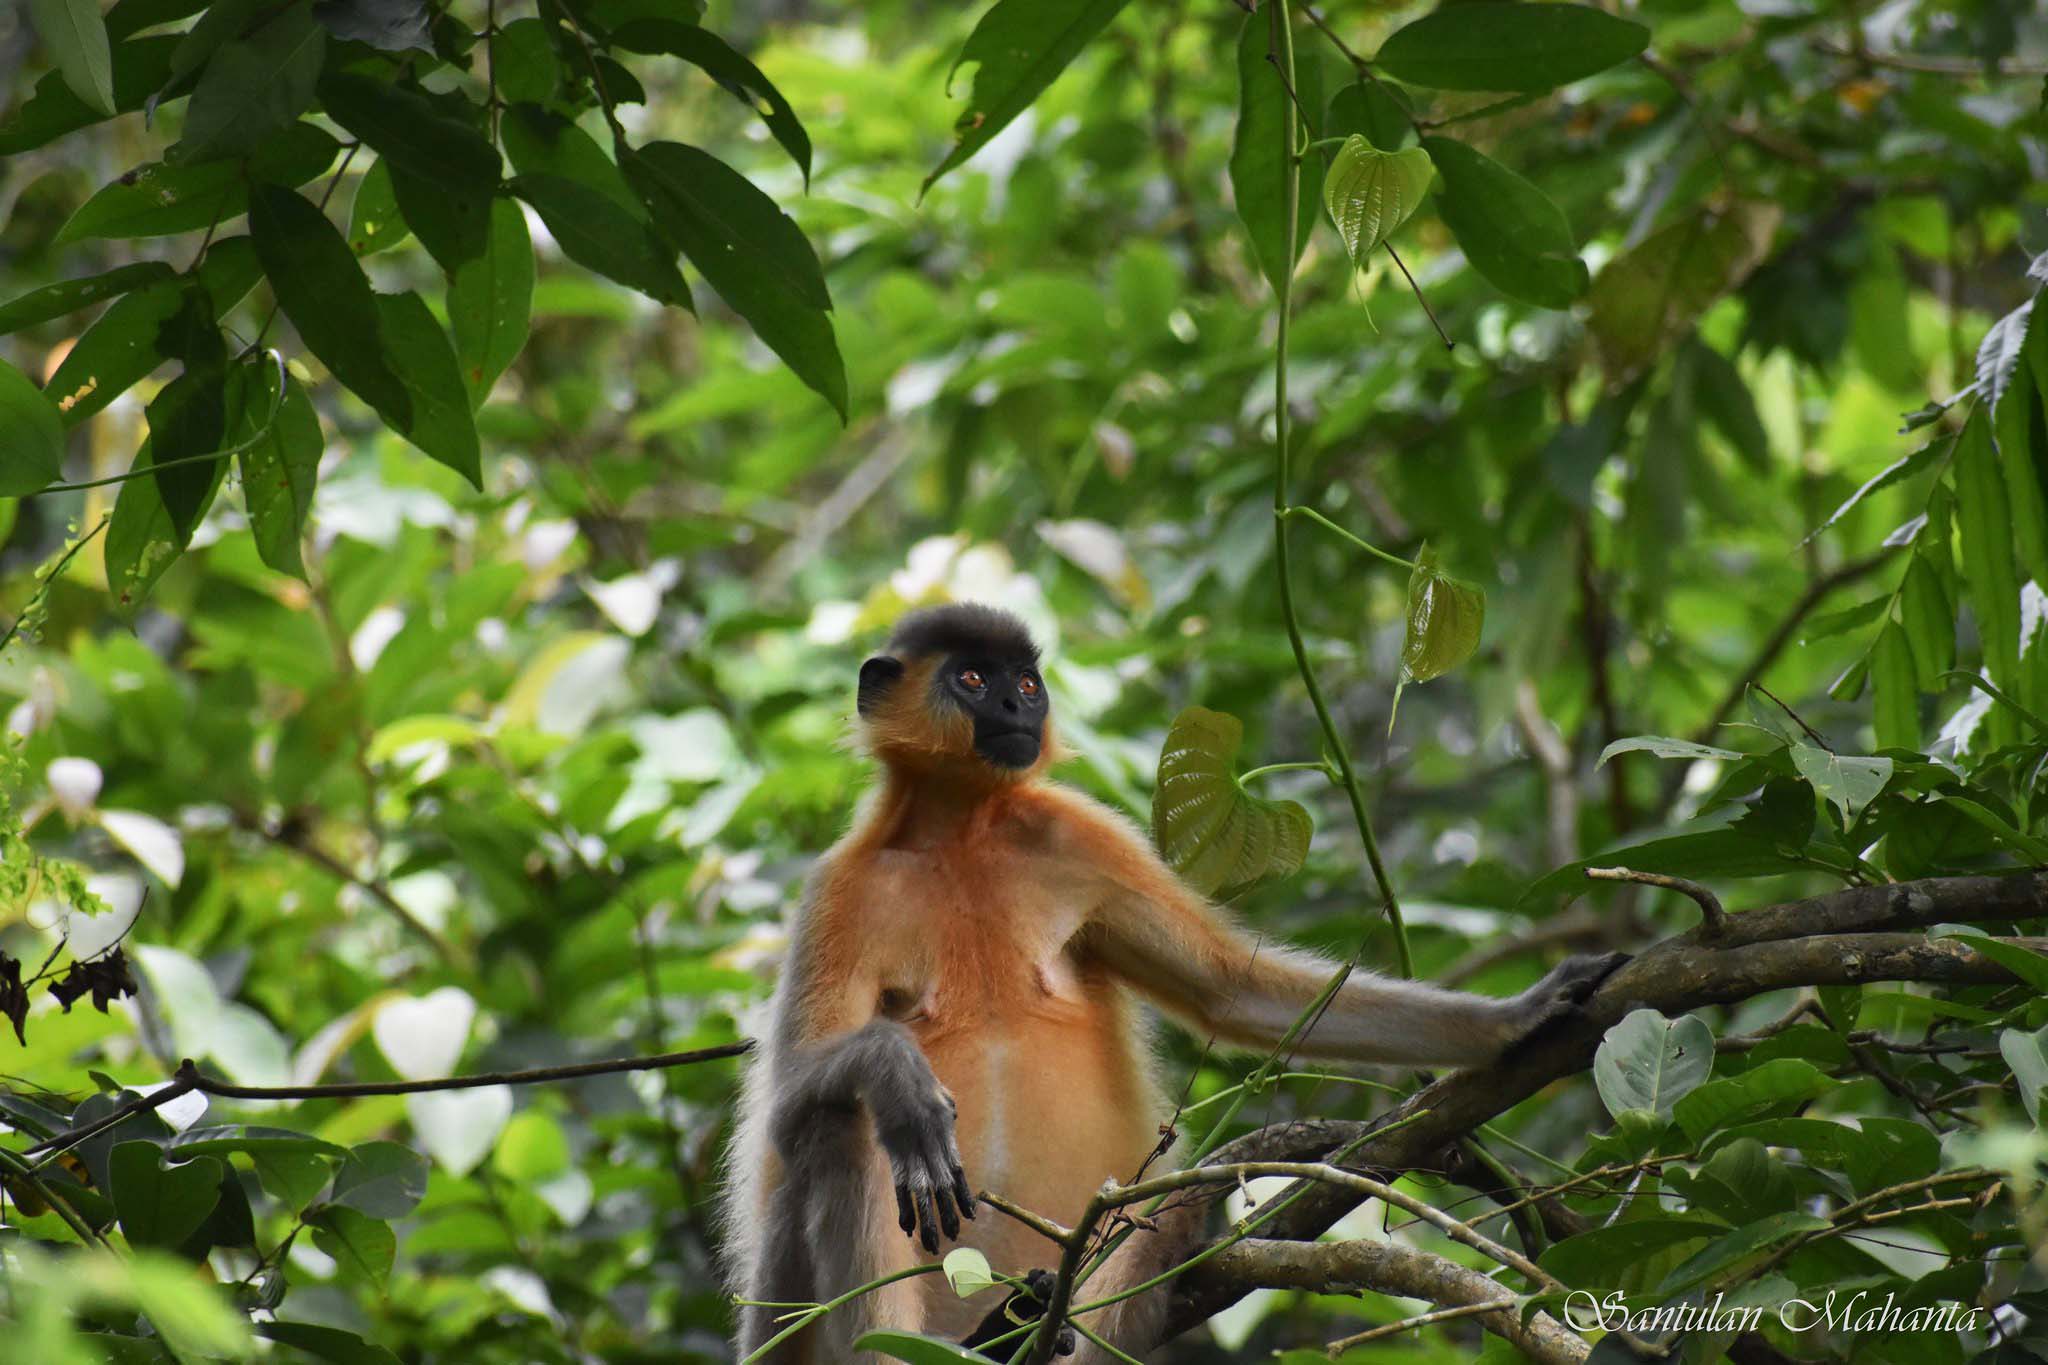 A capped langur in a tree, looking pensively into the distance